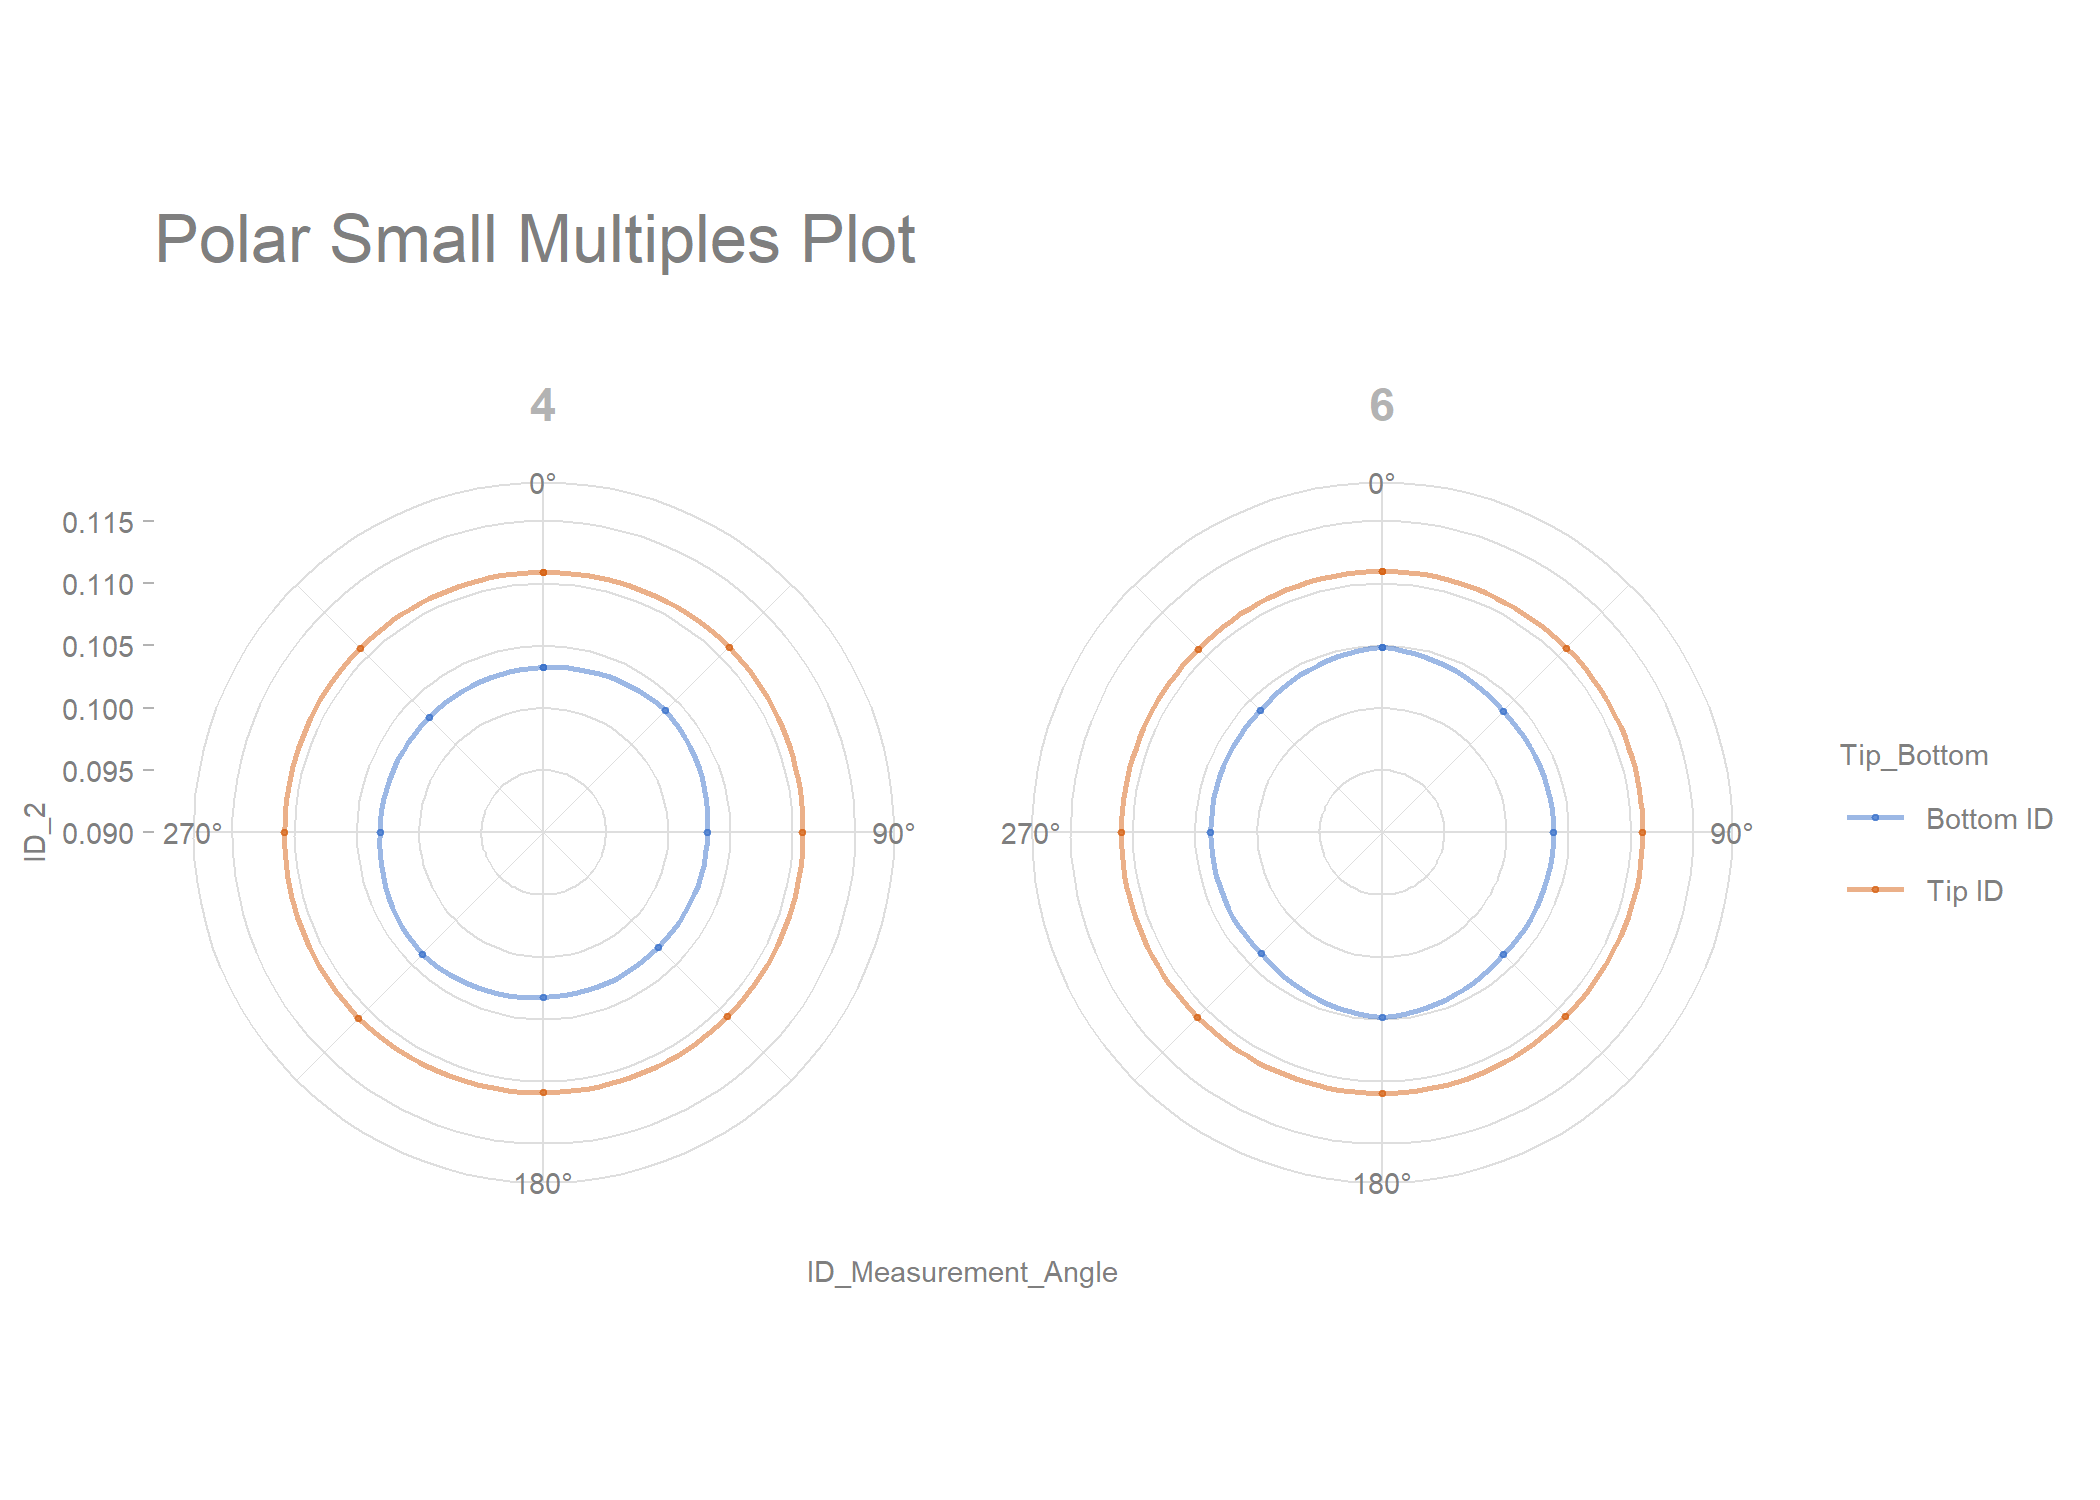 Example of a Polar Small Multiples Plot